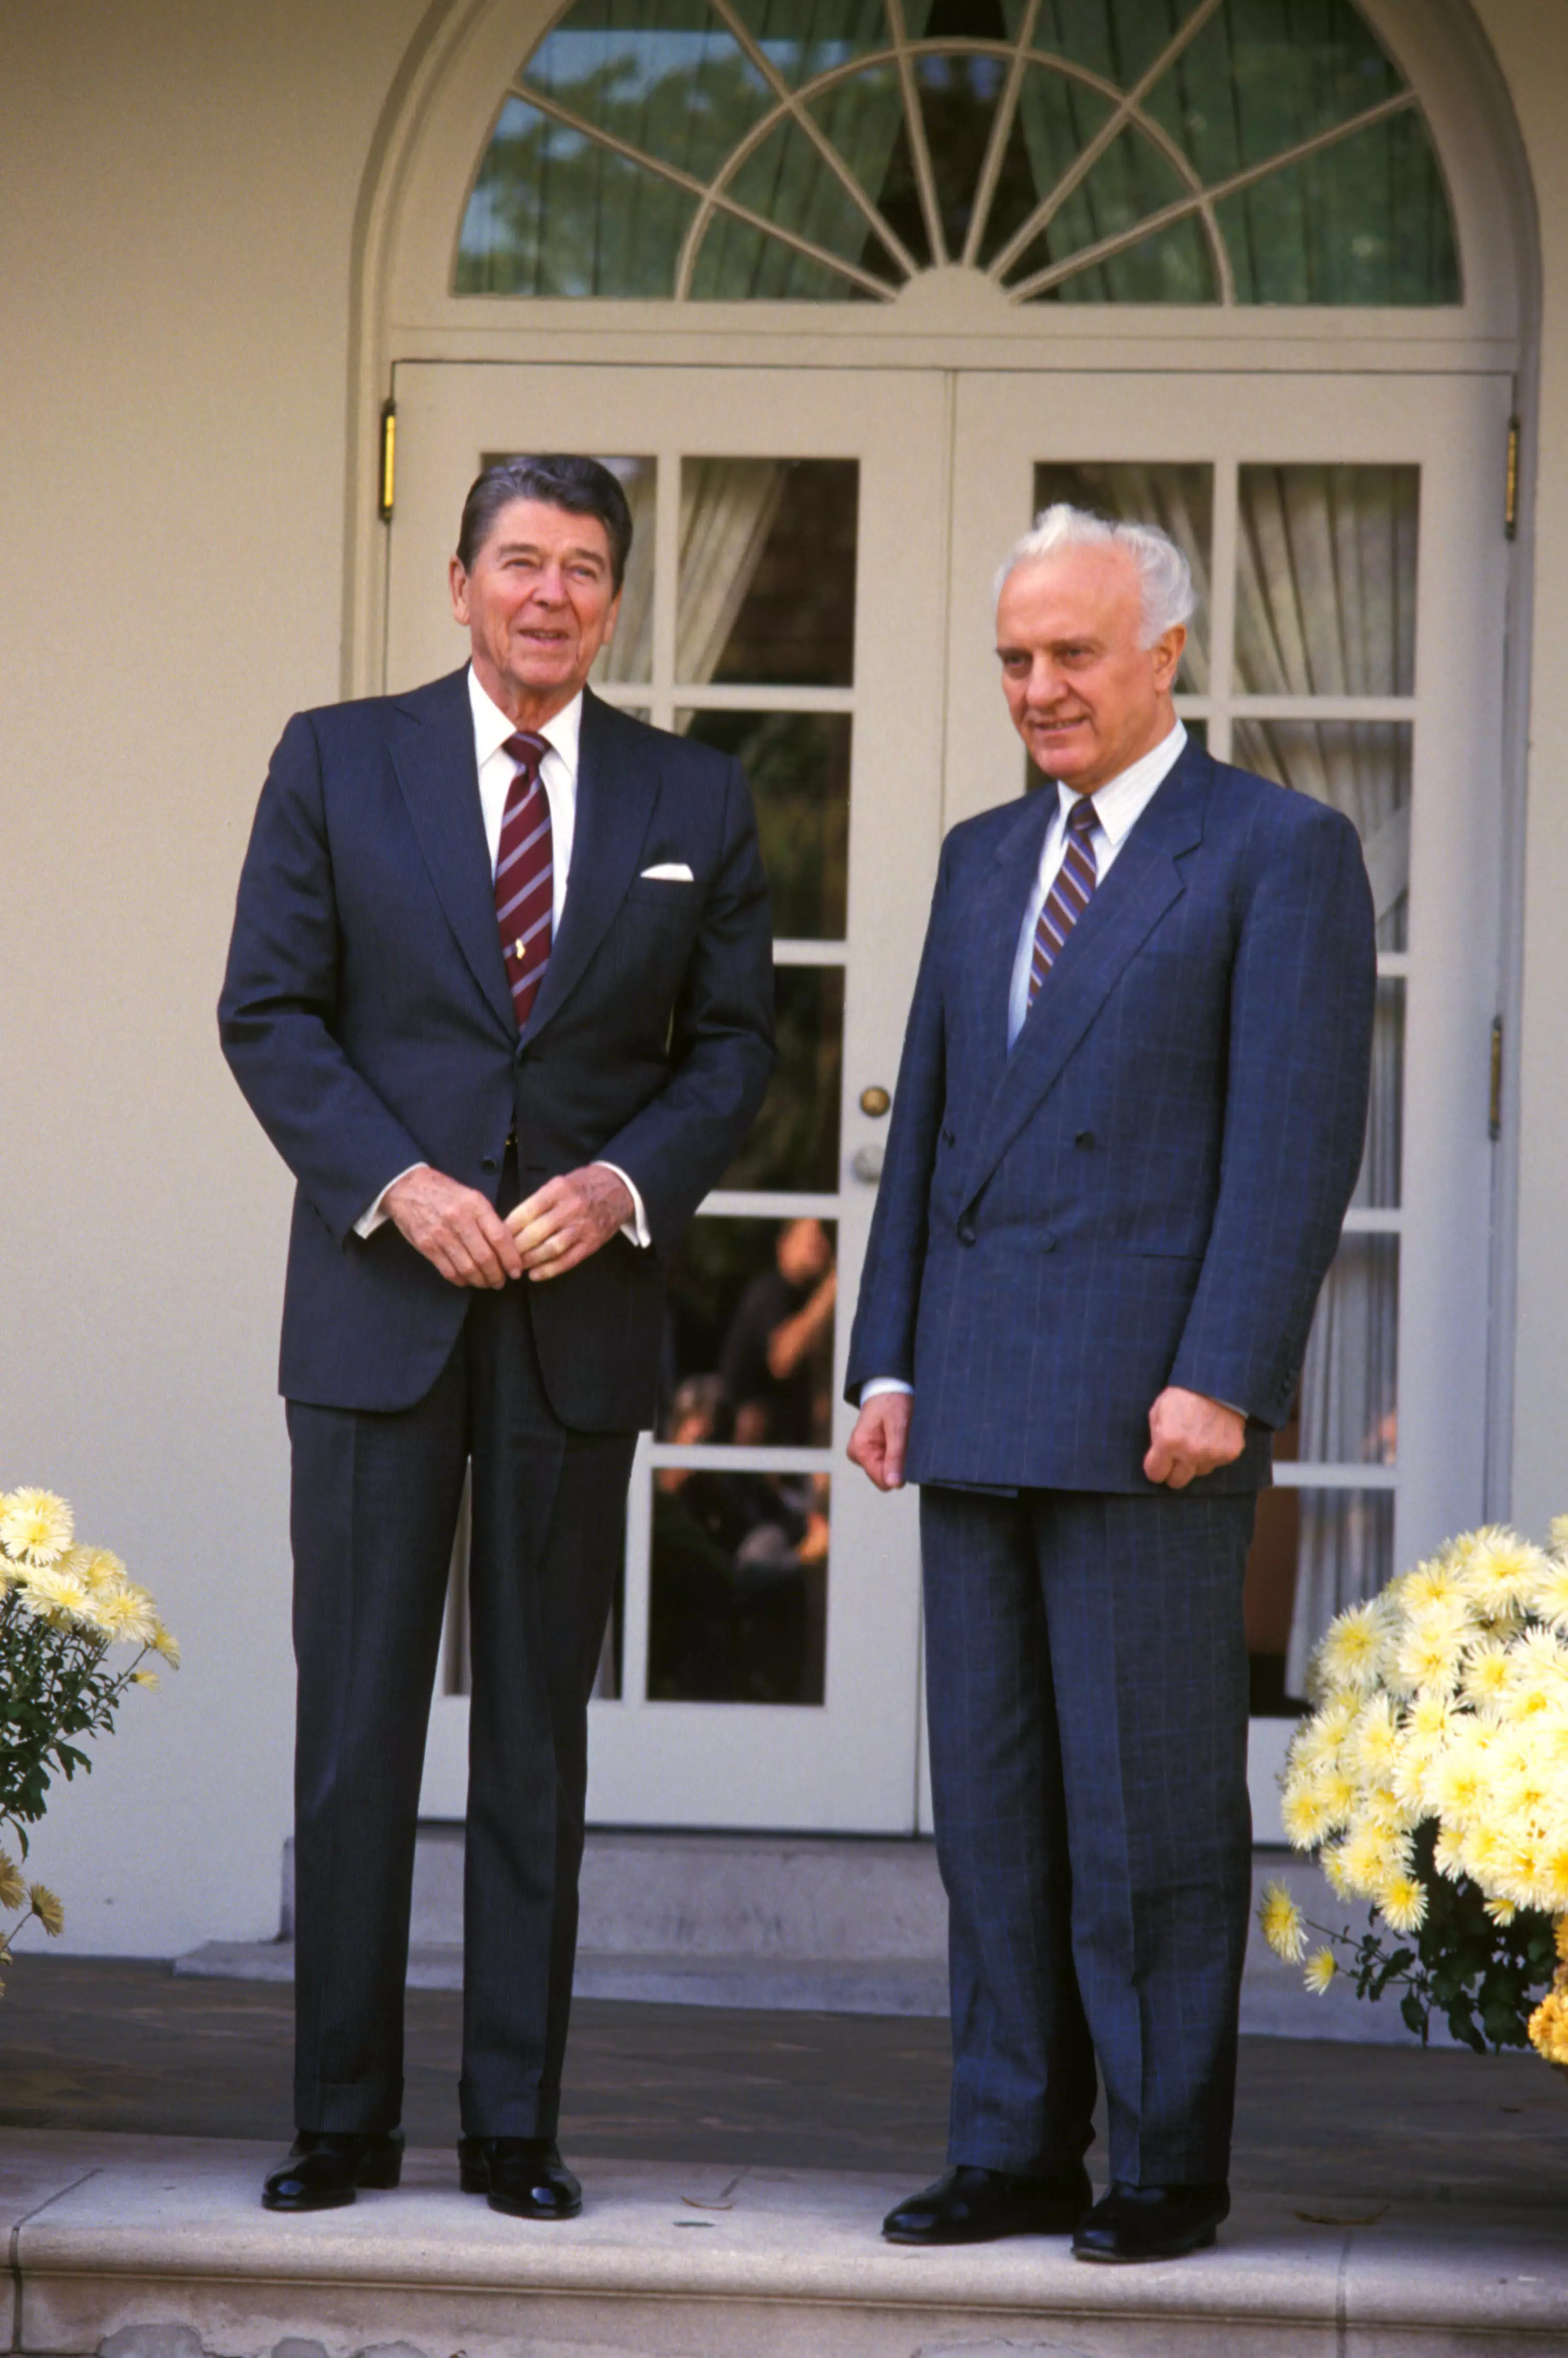 Ronald Reagan with Mikhail Gorbachev at the White House in 1987.